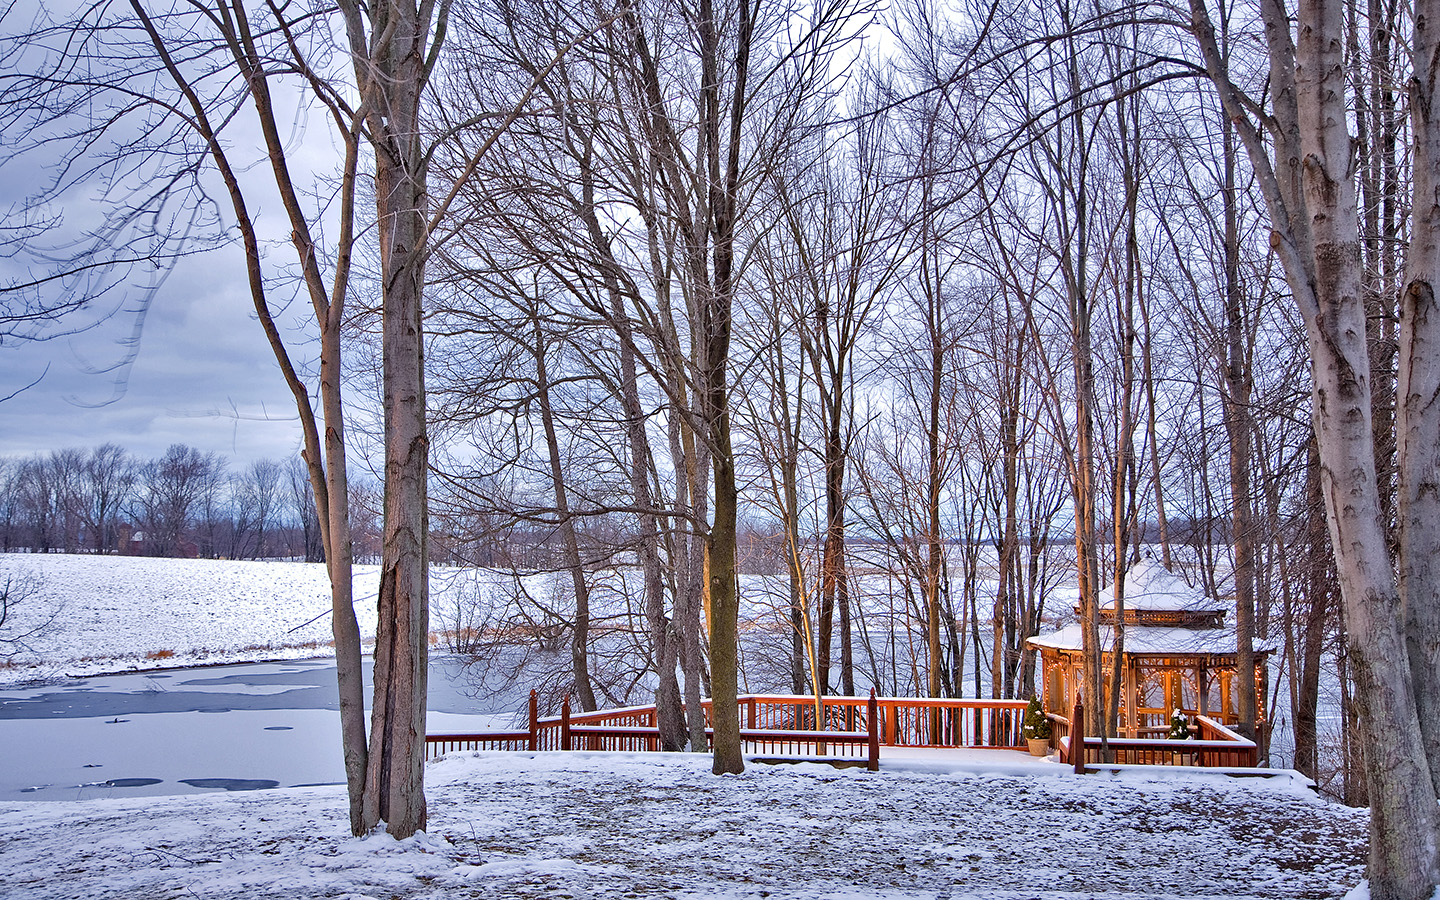 Gazebo, grounds and lake covered in snow